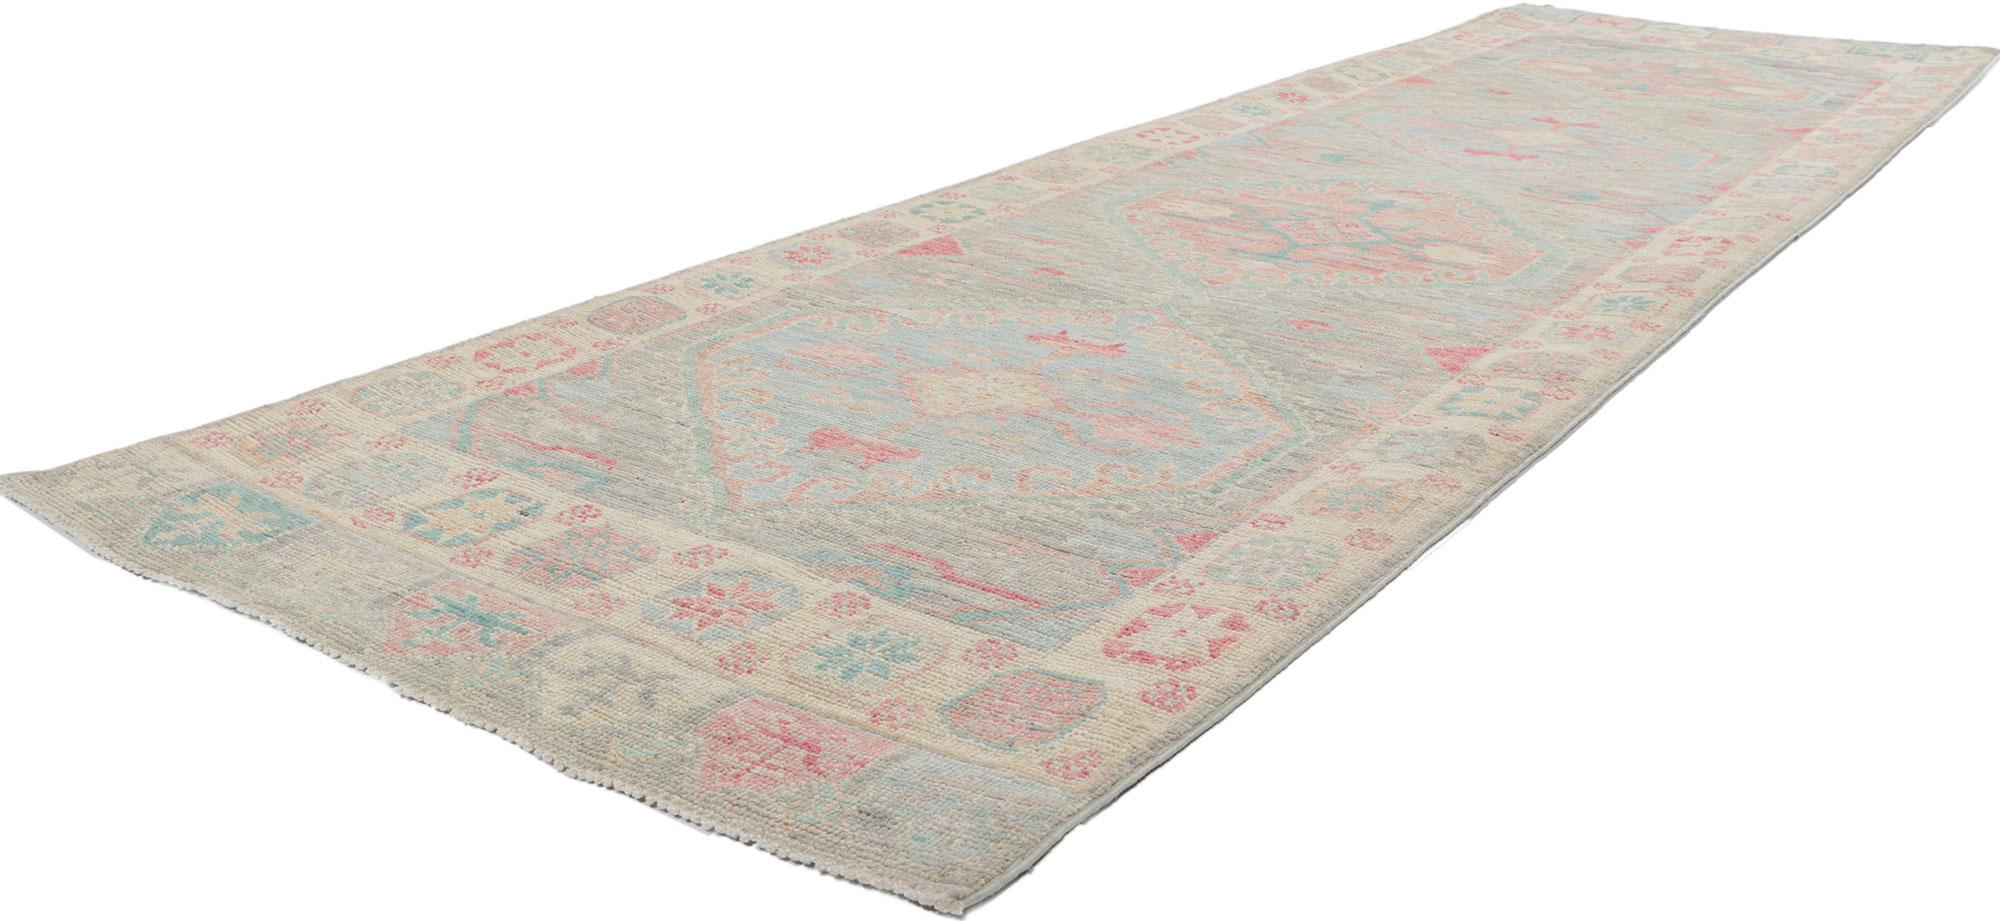 80862 New Contemporary Oushak runner, 03'00 x 10'02.
This hand-knotted wool contemporary Oushak hallway rug features an all-over botanical pattern composed of amorphous organic motifs spread across an abrashed bluish-gray field. It is enclosed with